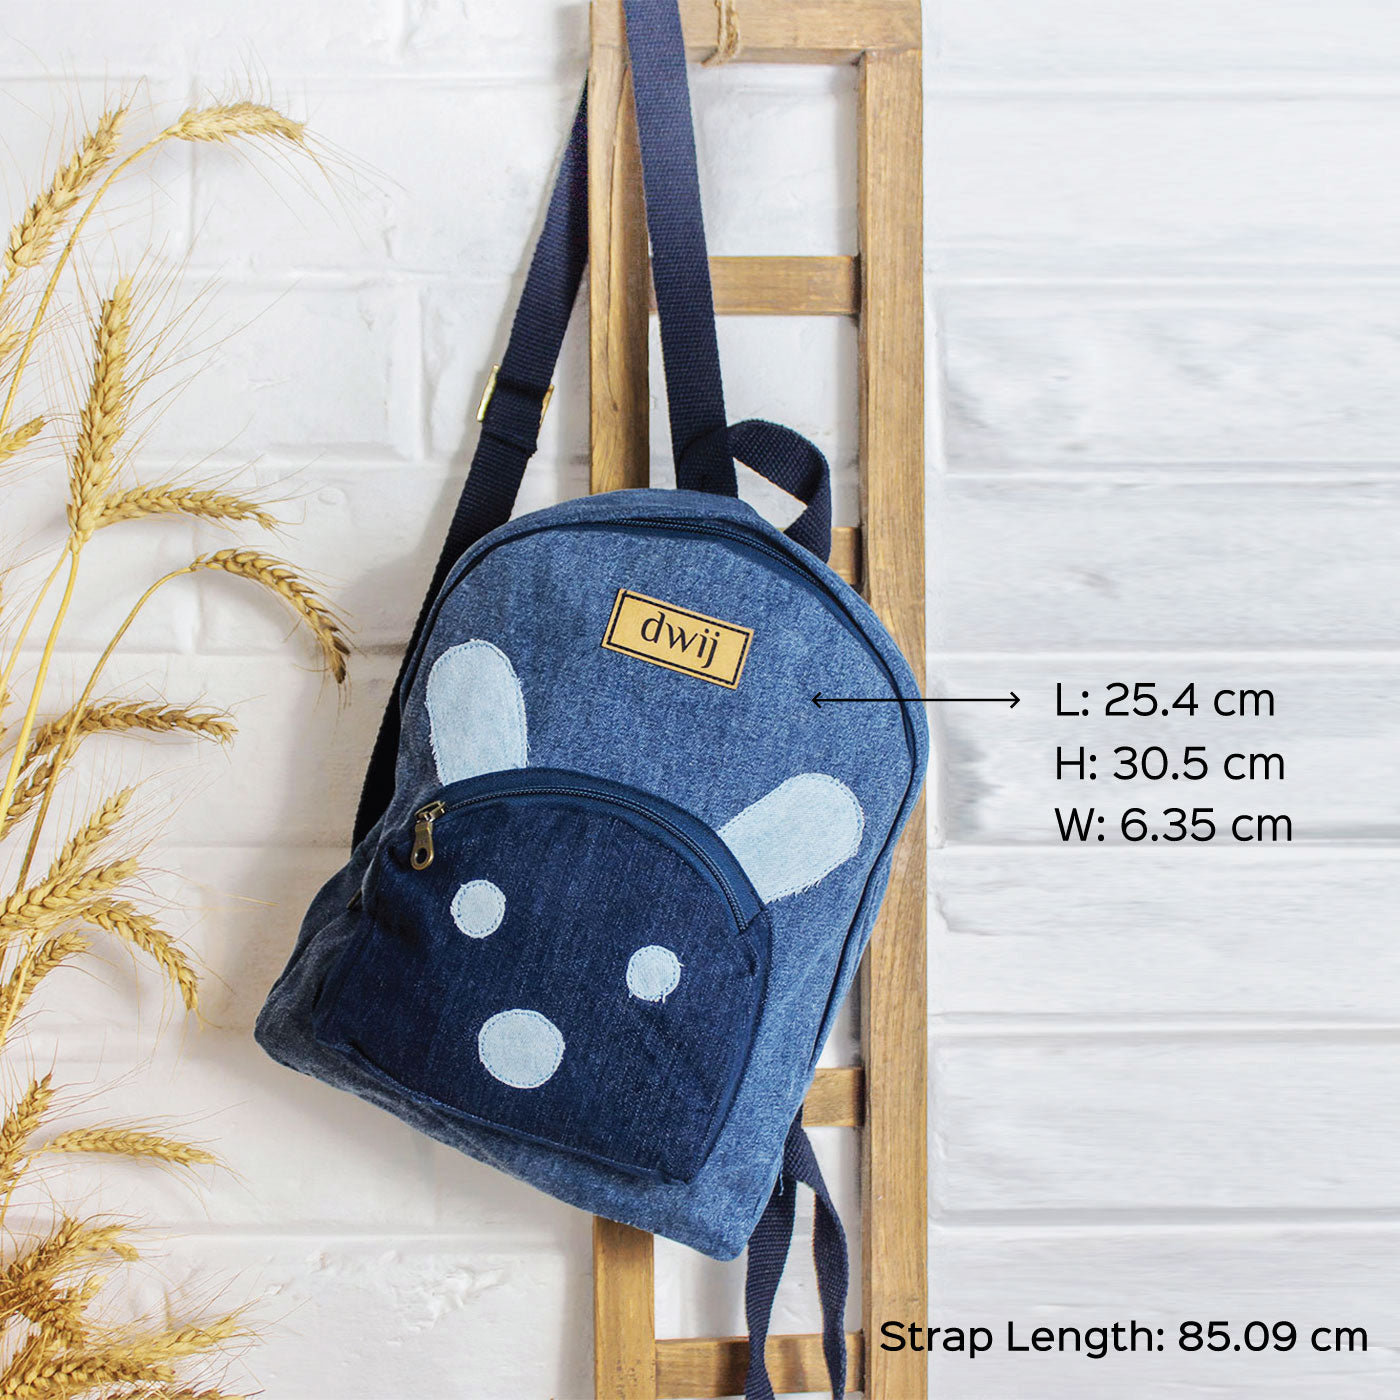 Eastpack presents 'Boro' - A limited edition backpack made of Japanese  vintage denim